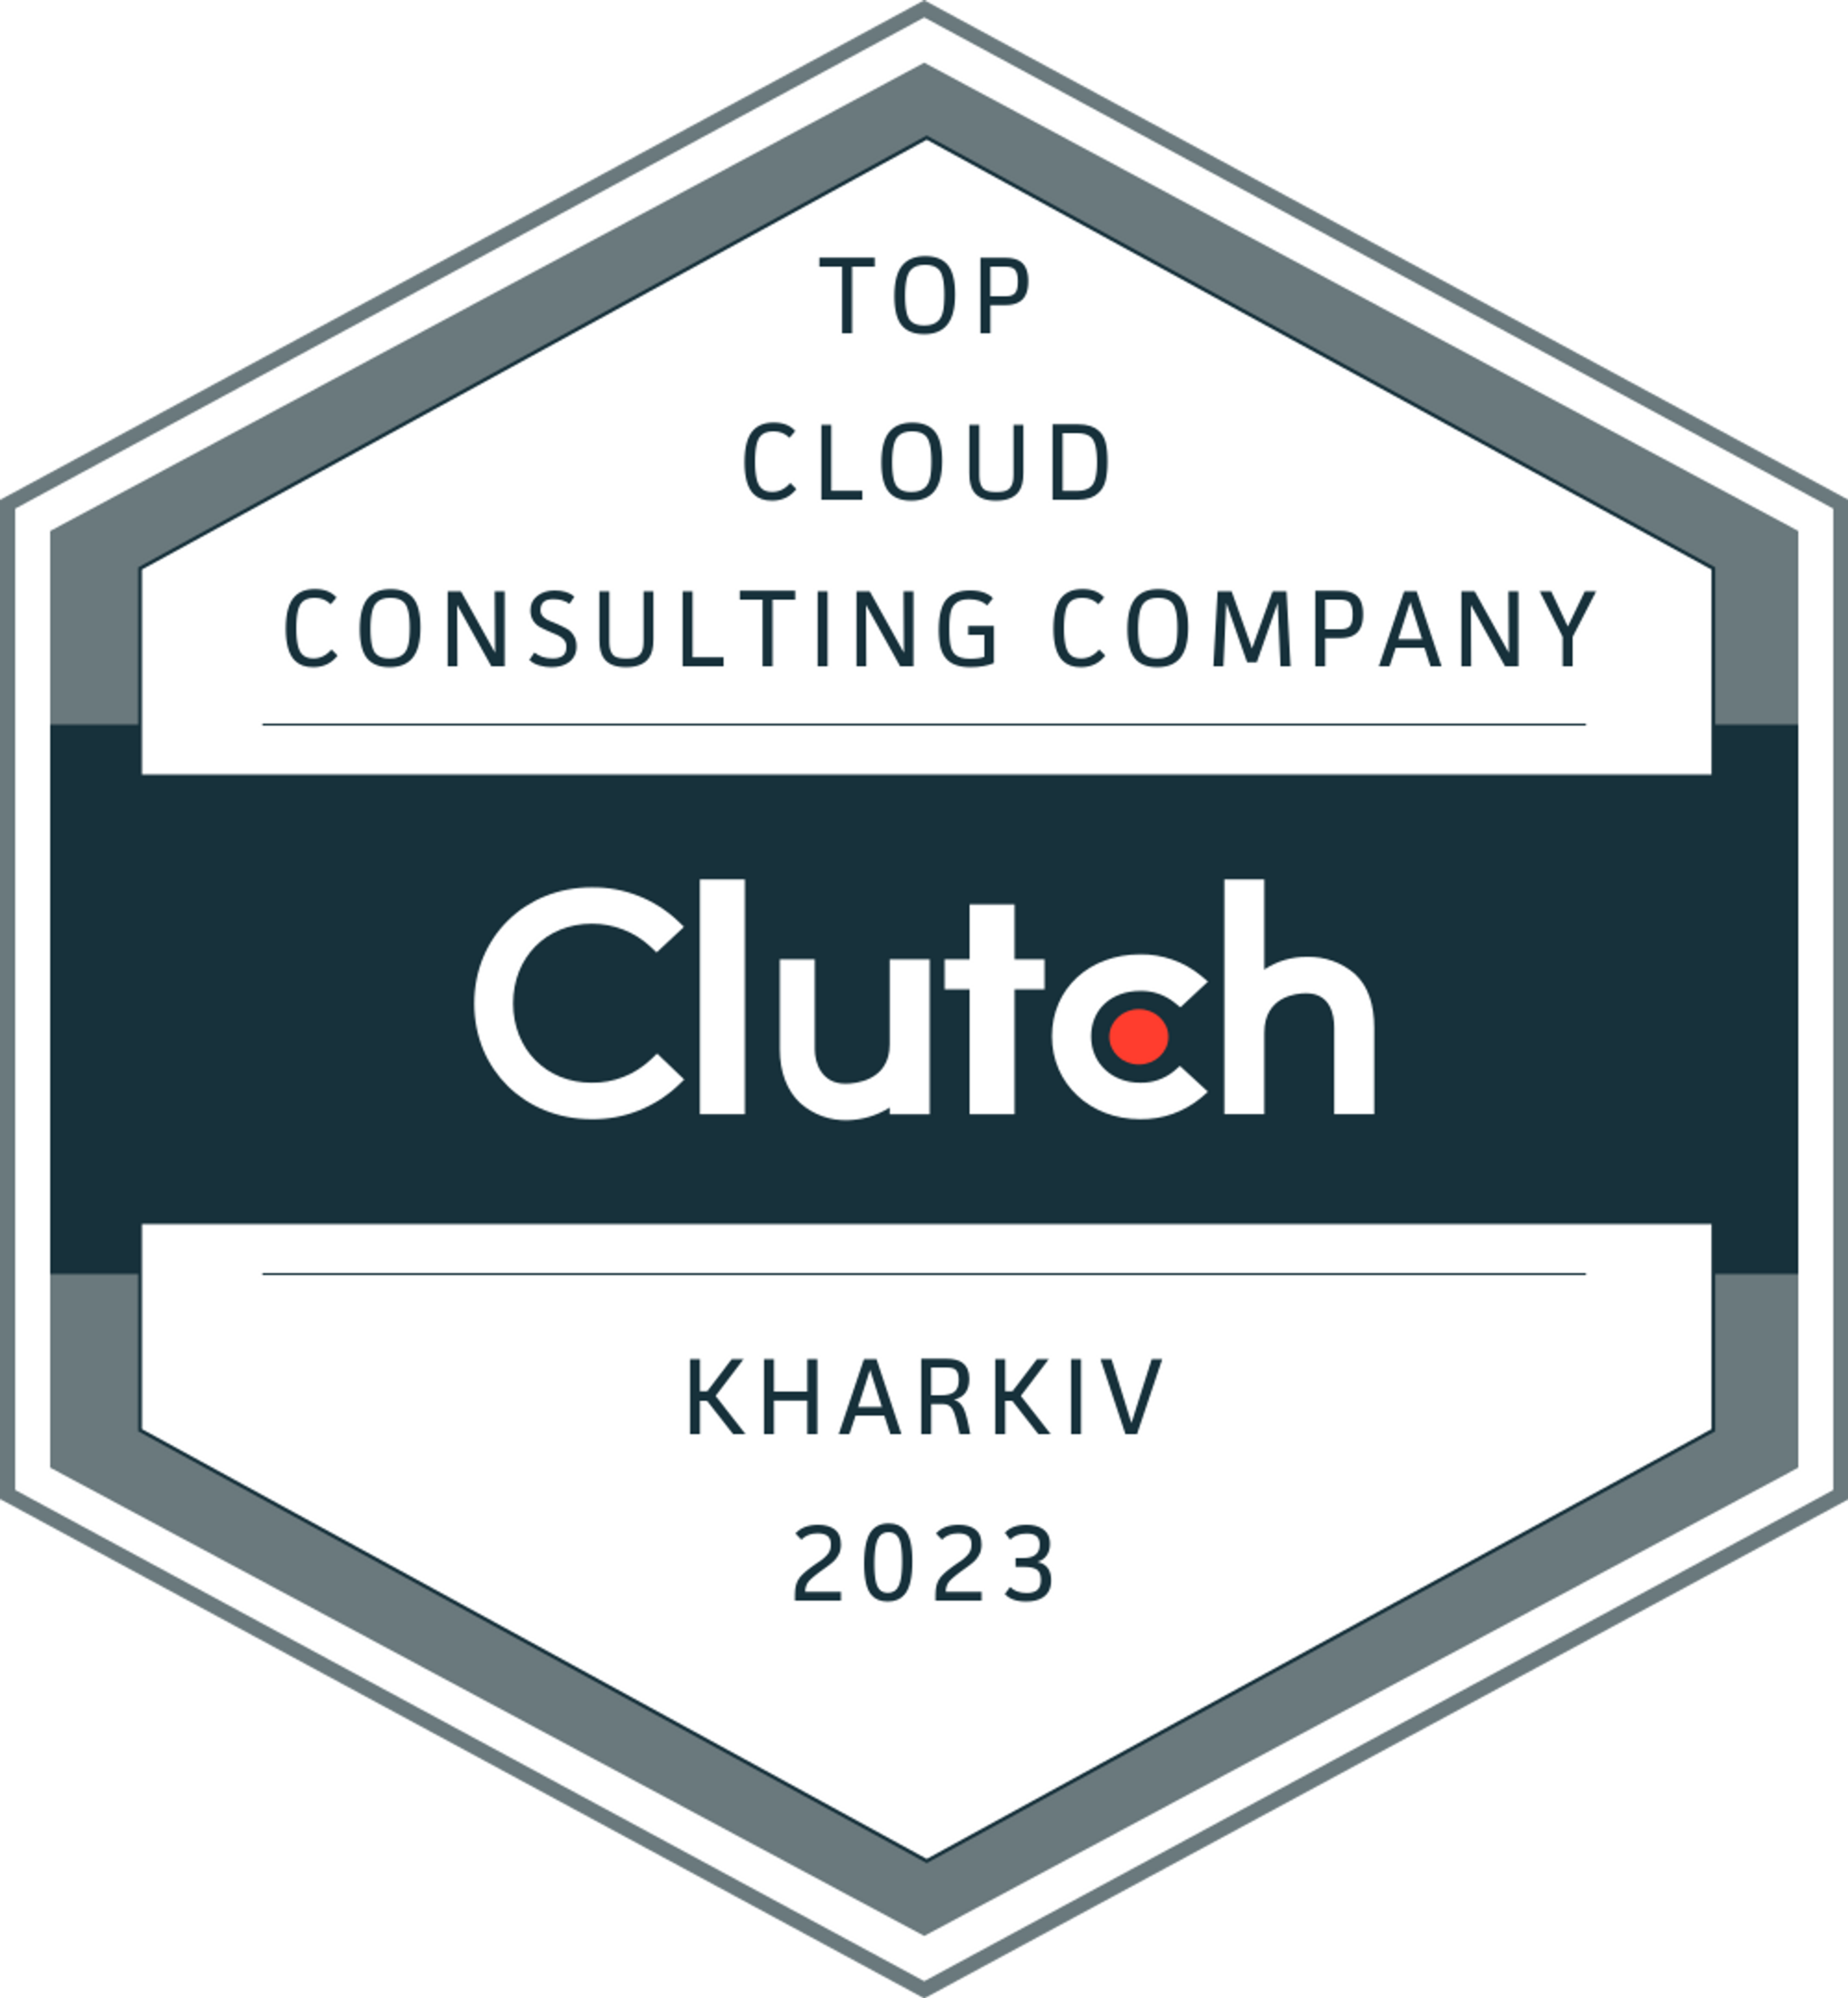 Top Cloud Consulting Company